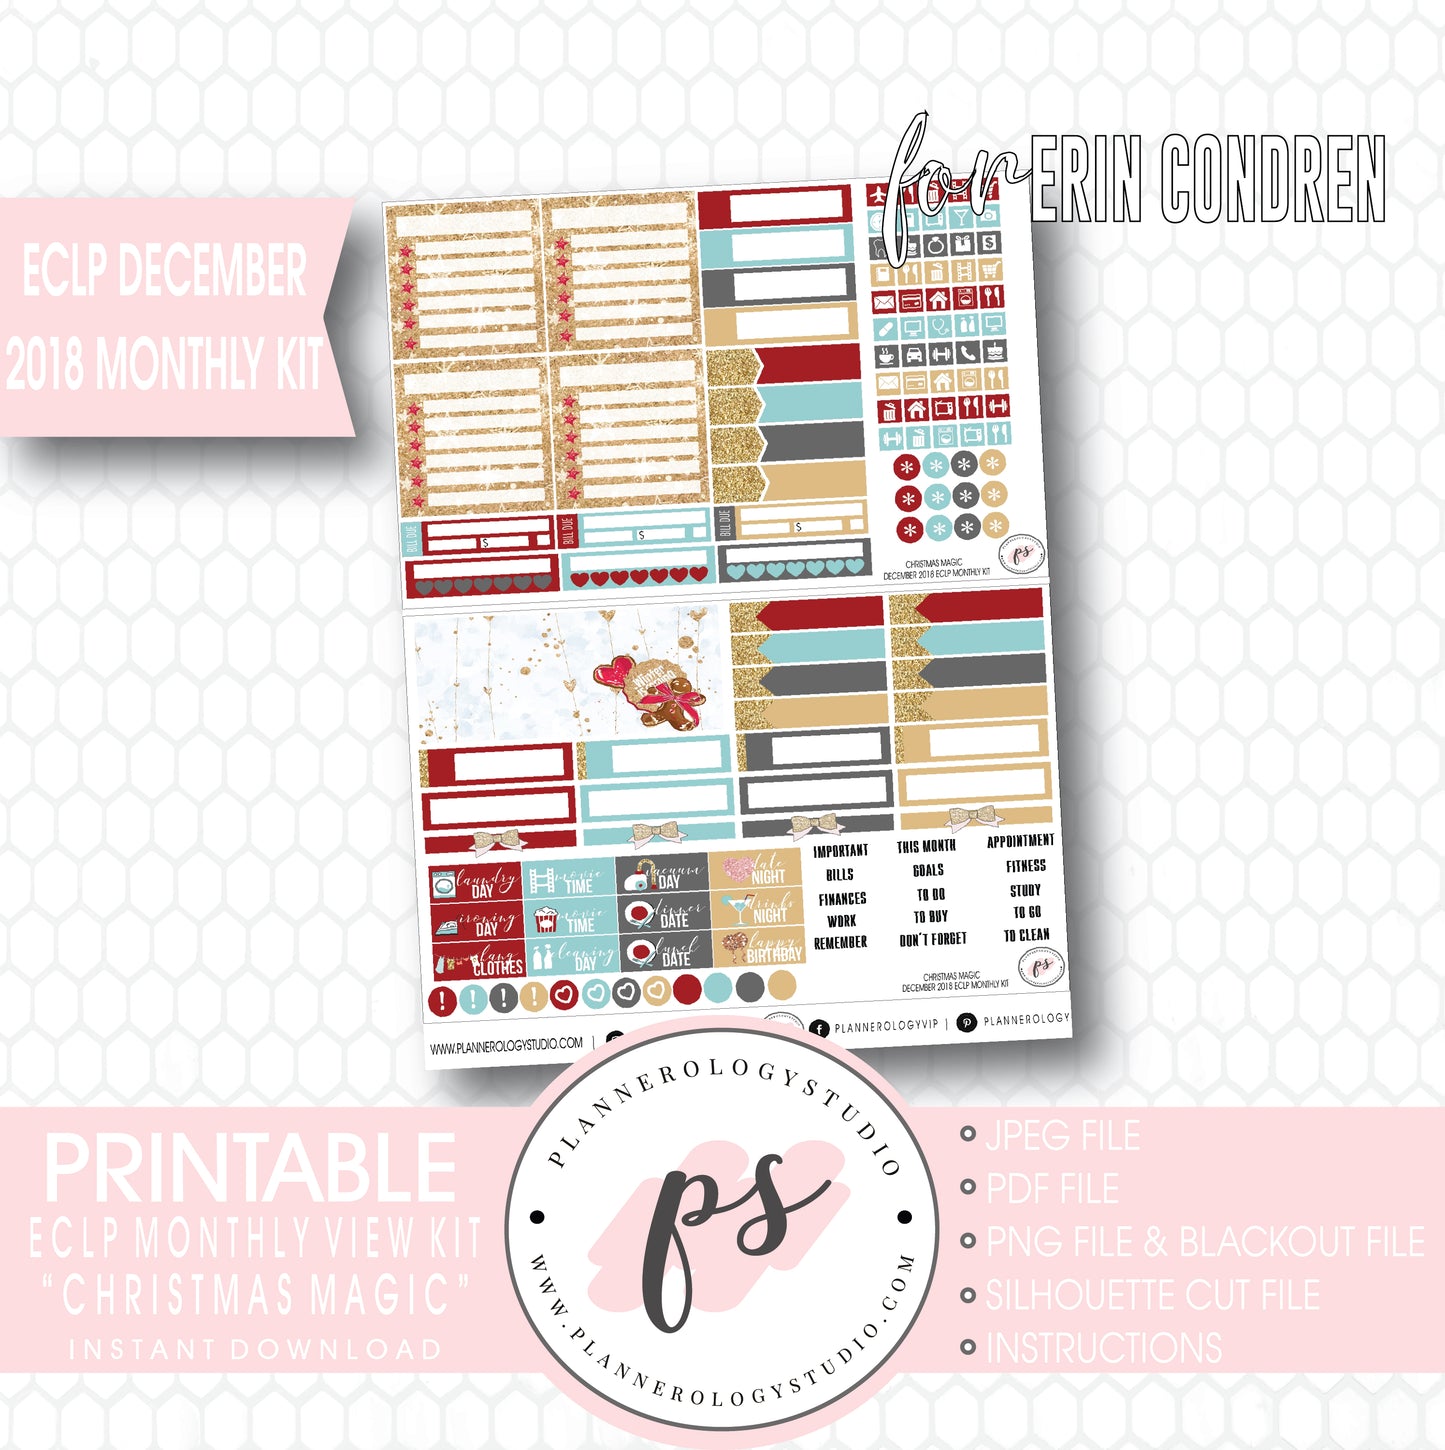 Christmas Magic December 2018 Monthly View Kit Digital Printable Planner Stickers (for use with Erin Condren) - Plannerologystudio